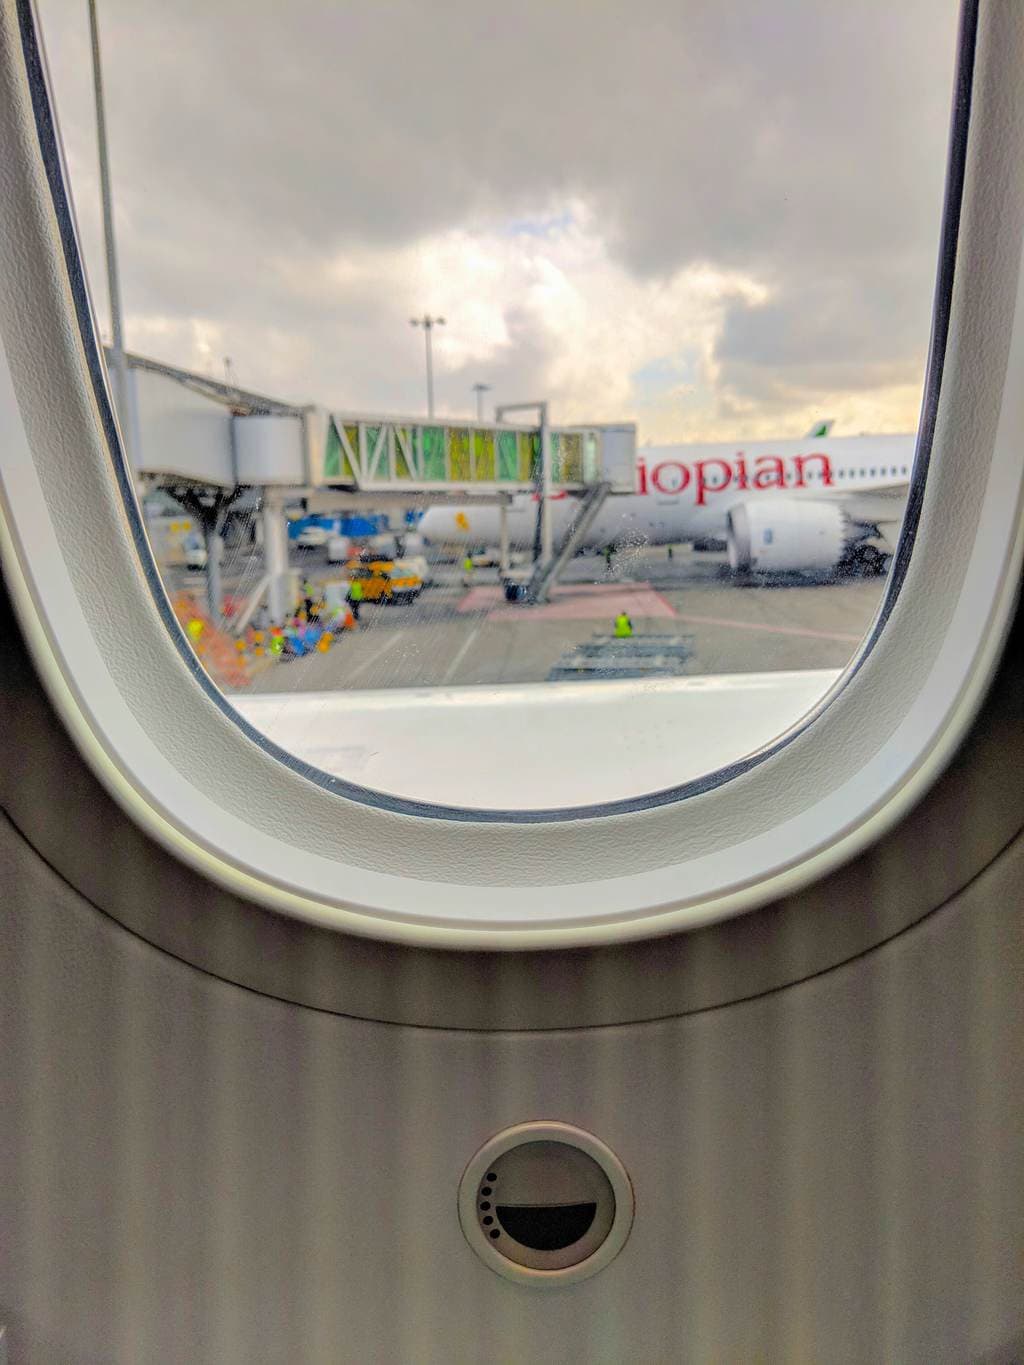 Review Of Ethiopian Airlines Business Class 787 Dreamliner